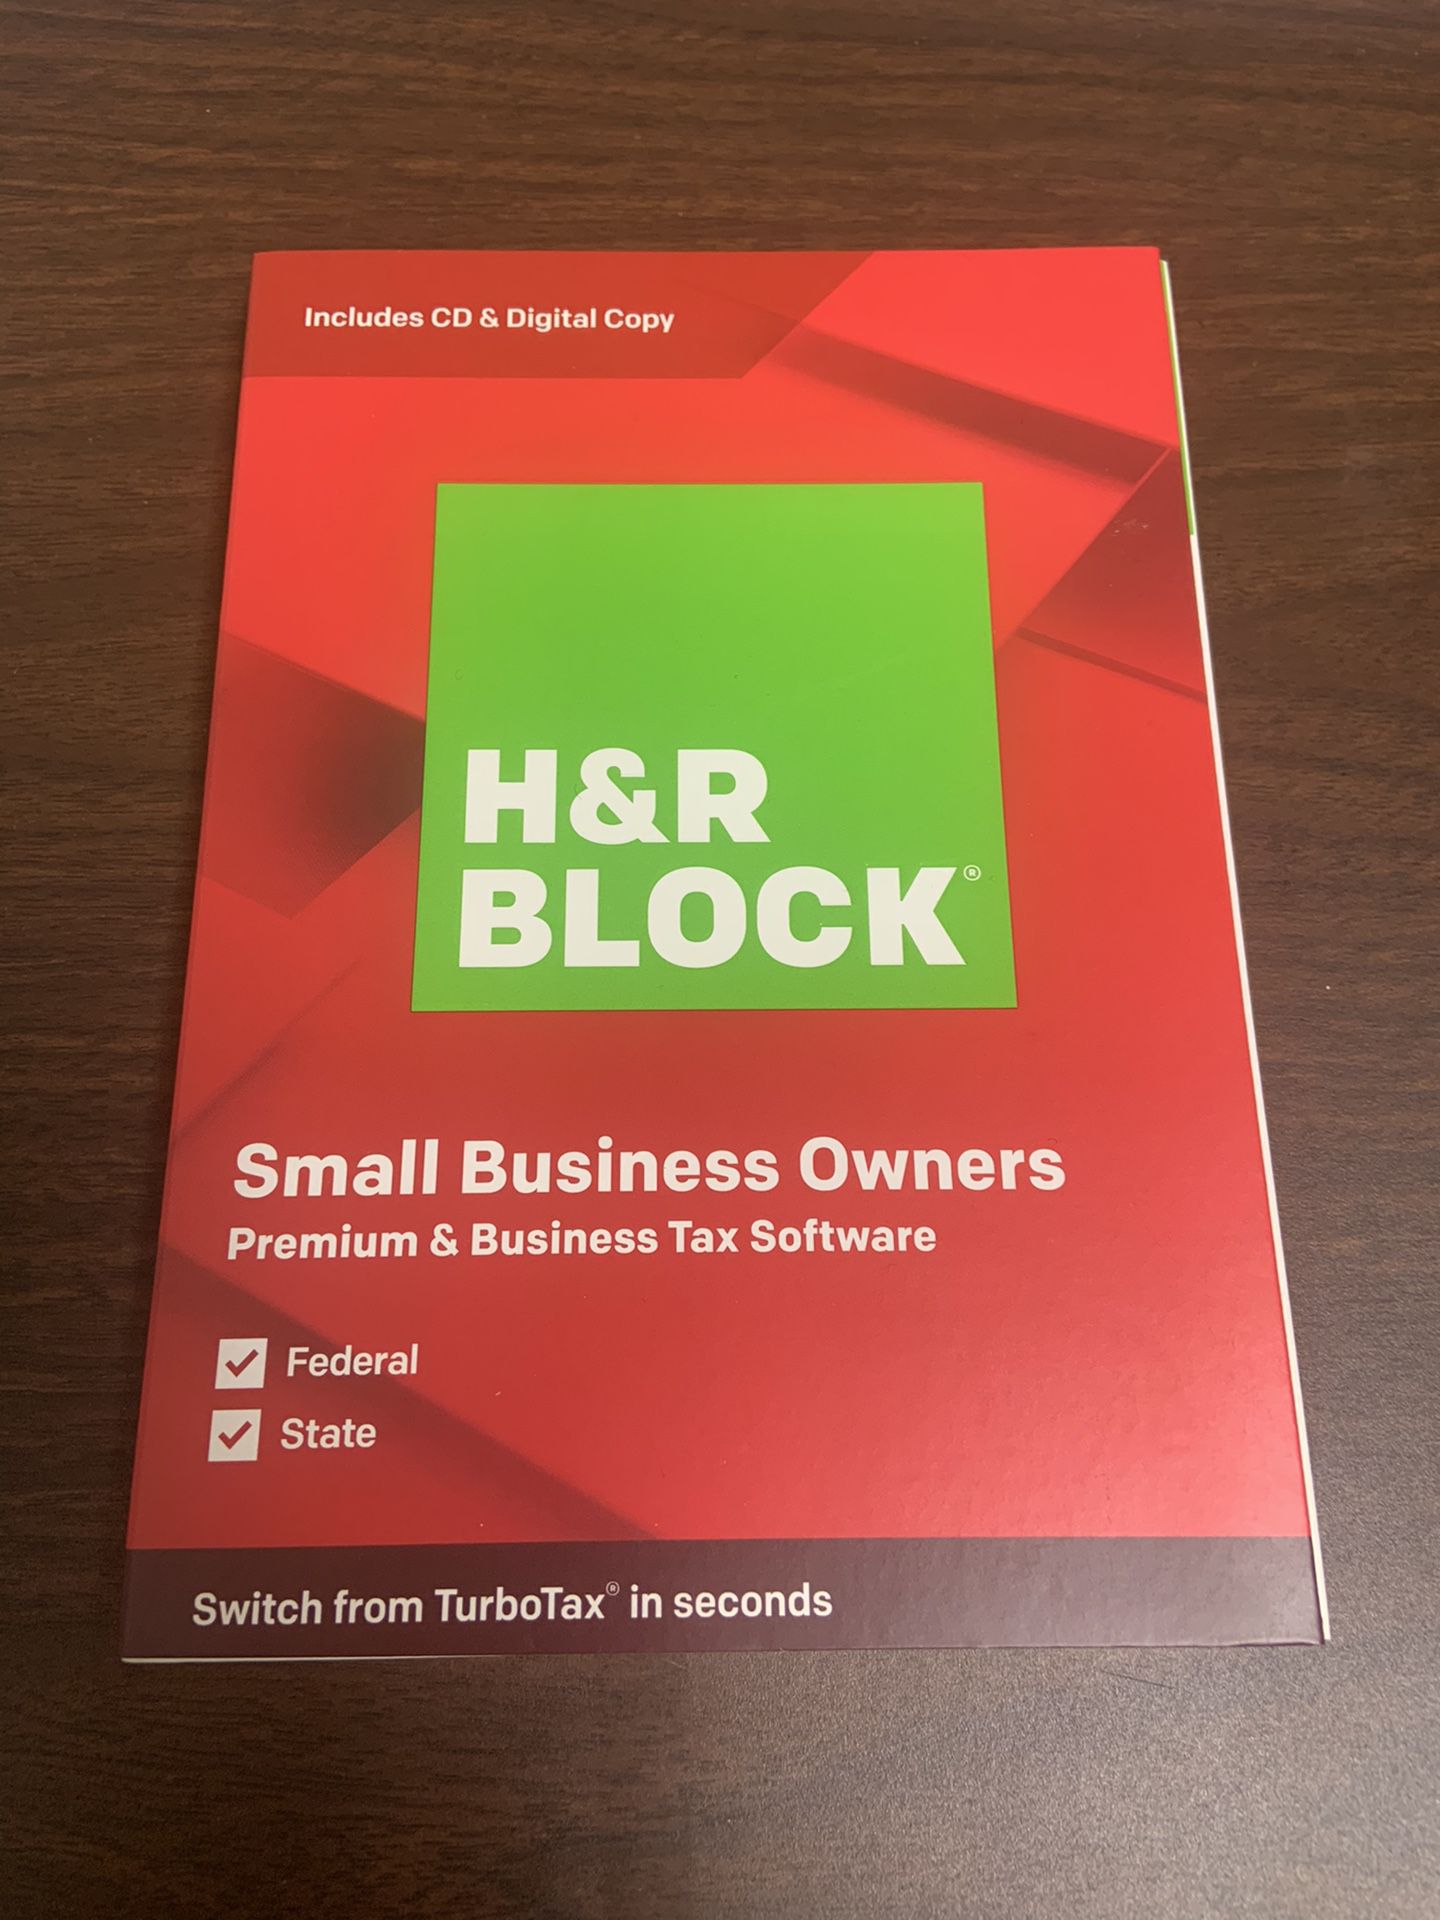 H&R Block Small Bussiness Owners 2019